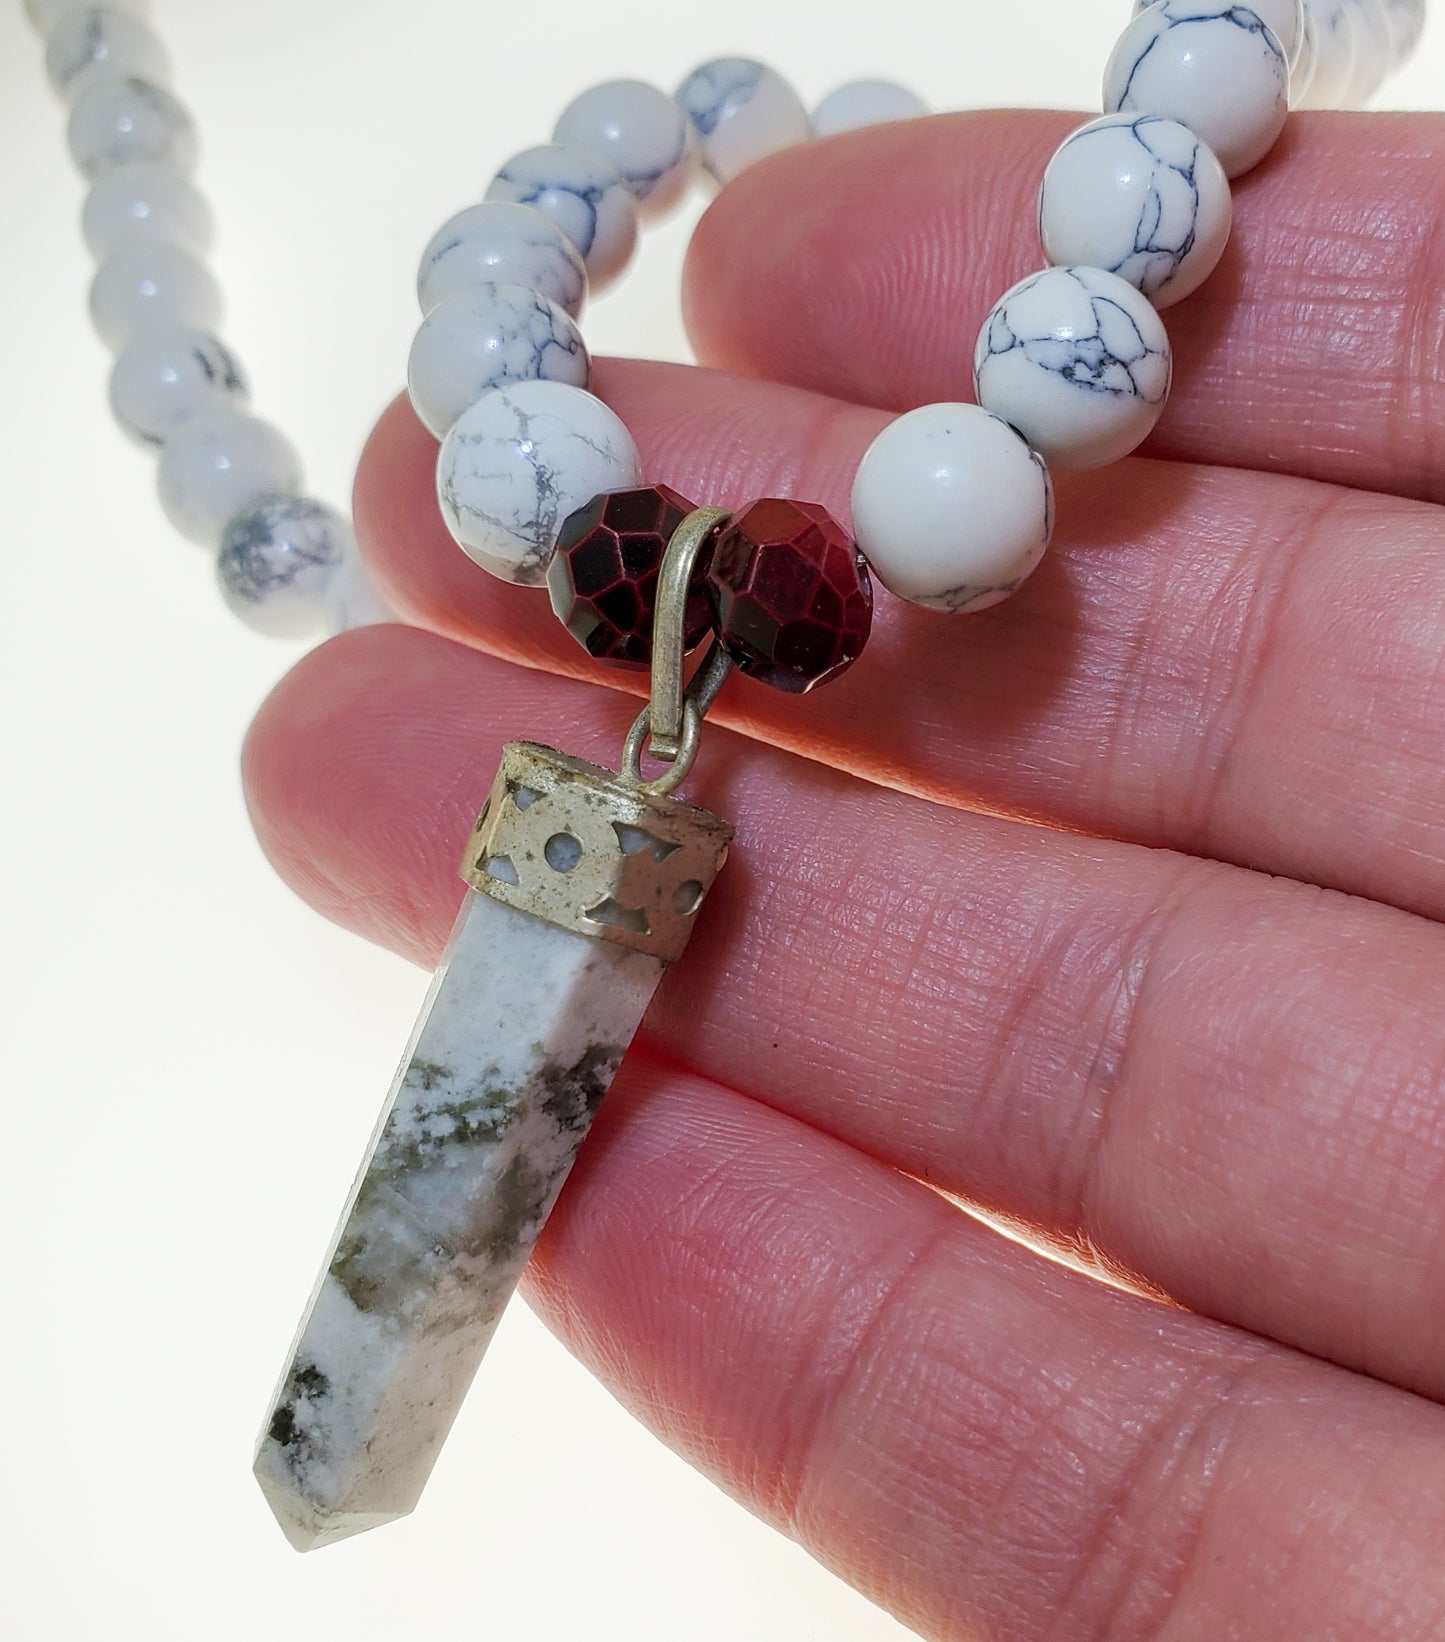 Pointed Howlite Serenity Beads Necklace | Handmade Custom Jewelry Gift  17.5" Long